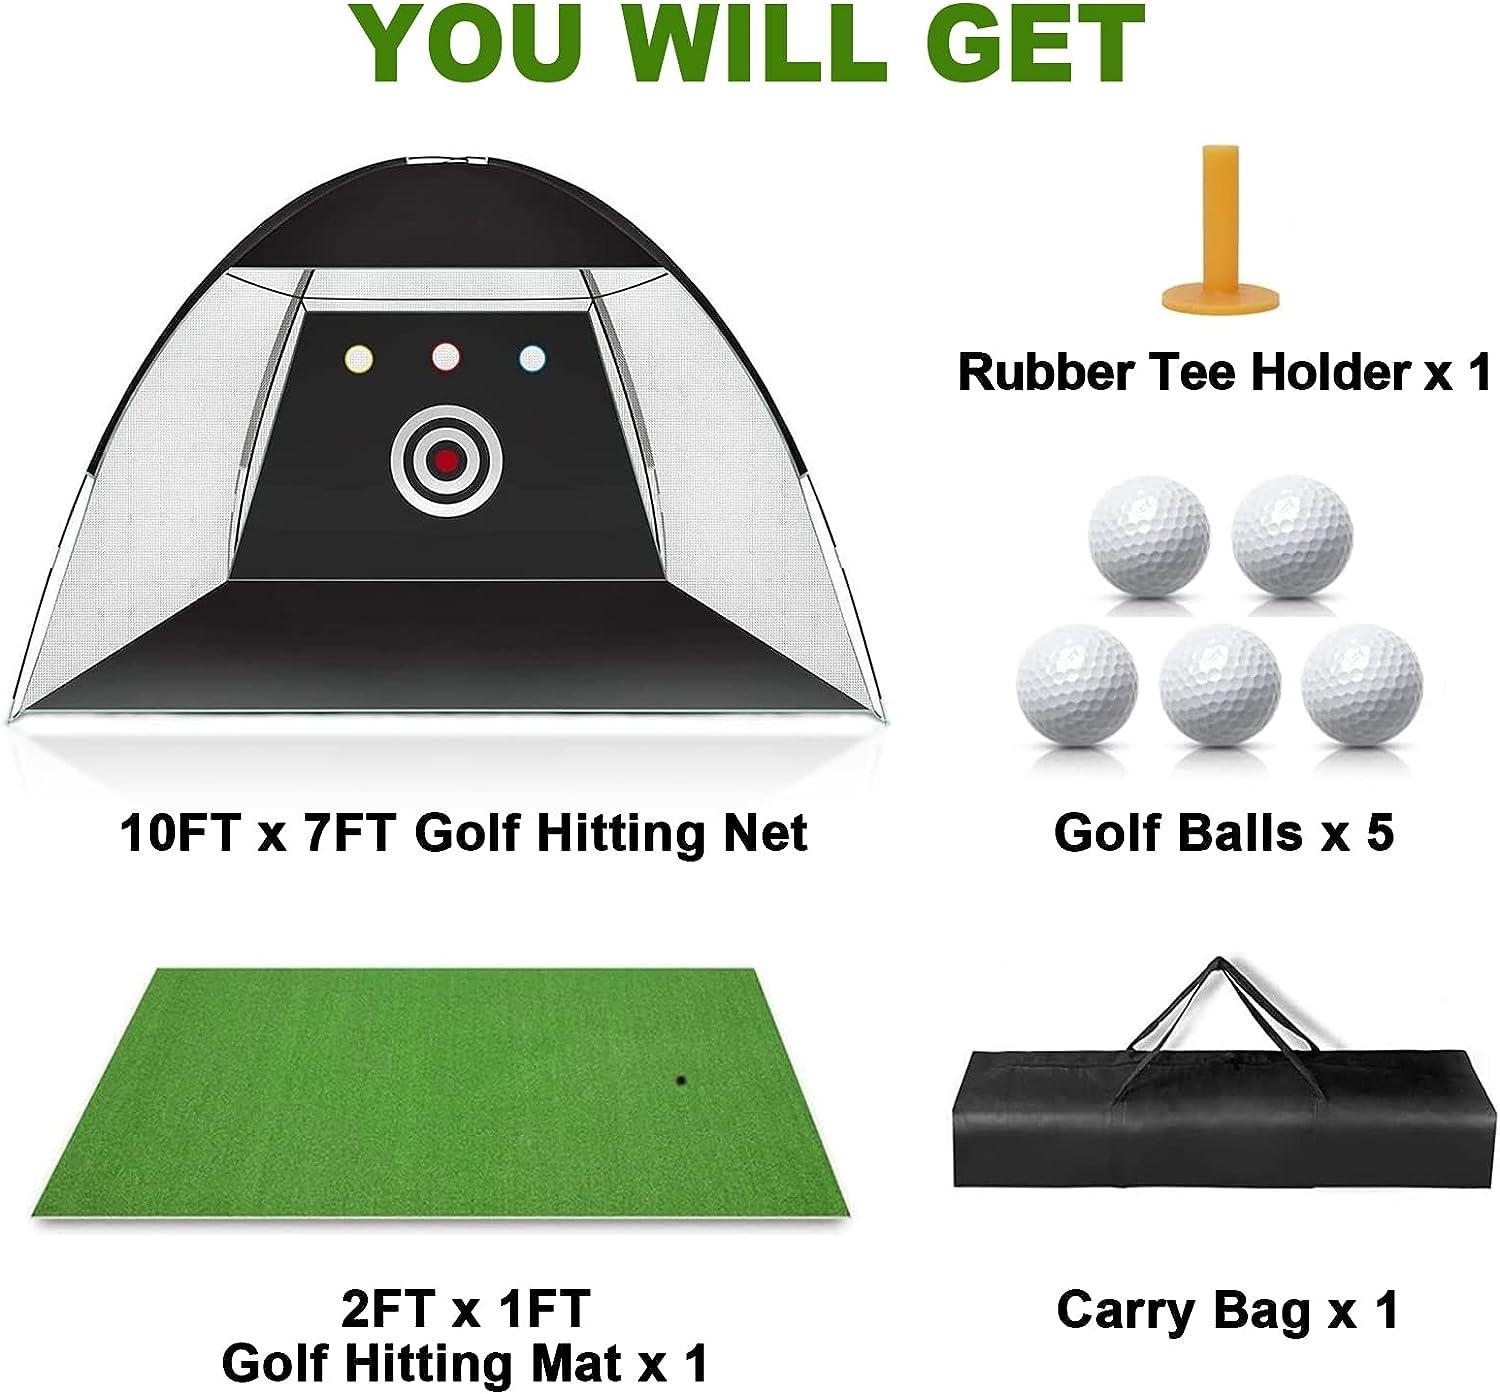 Golf Net: 10 x 7ft Golf Hitting Nets for Backyard Driving, Indoor/Outdoor  Golf Chipping/Swing Practice Nets with Targets and Mats, Ideal Gifts for